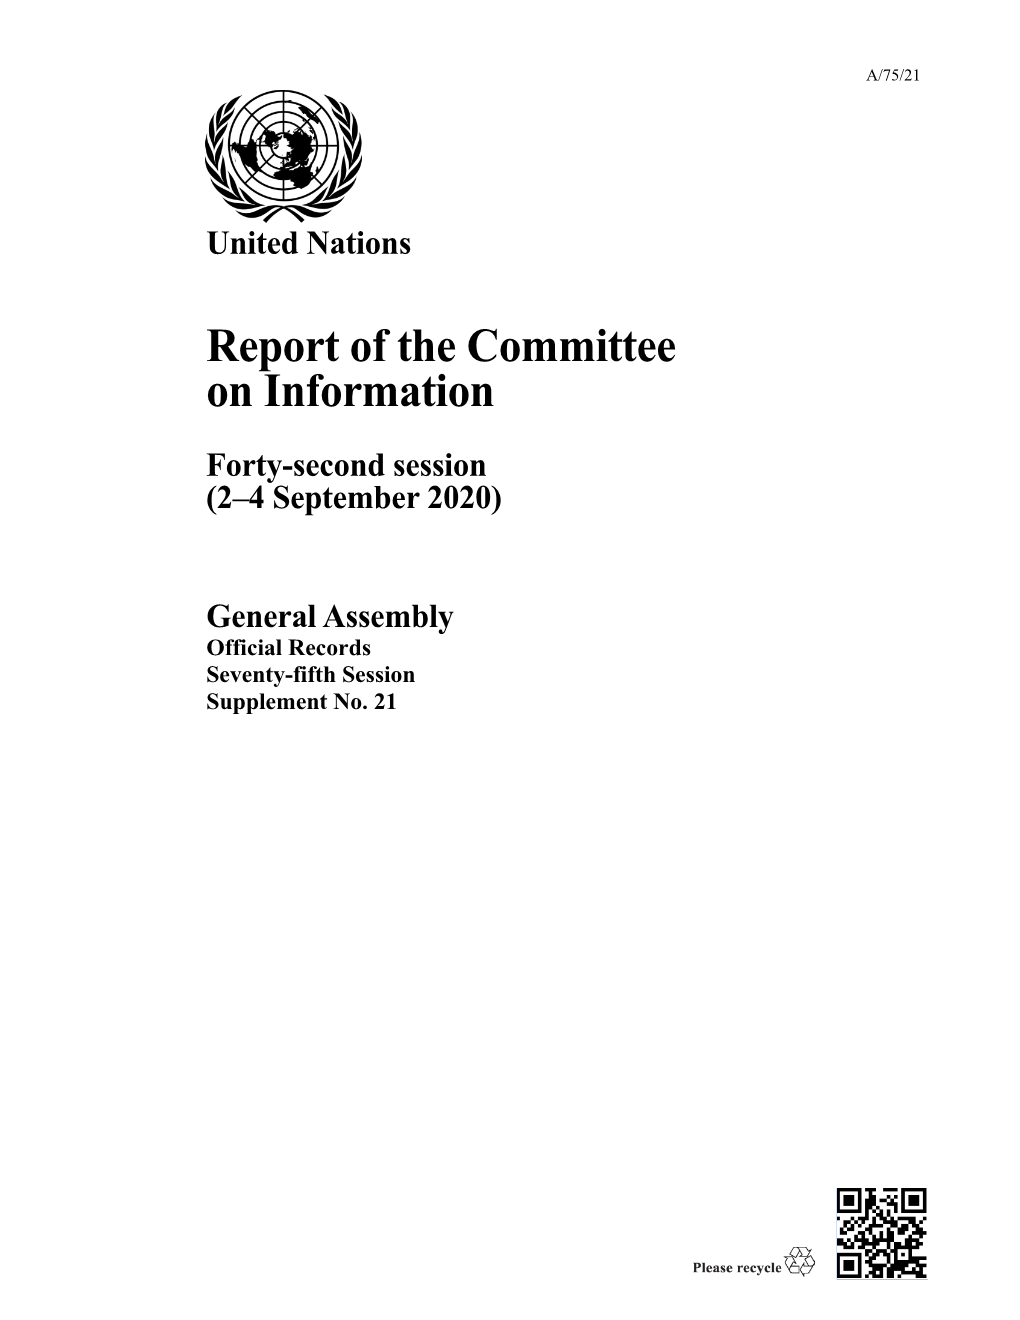 General Assembly Official Records Seventy-Fifth Session Supplement No